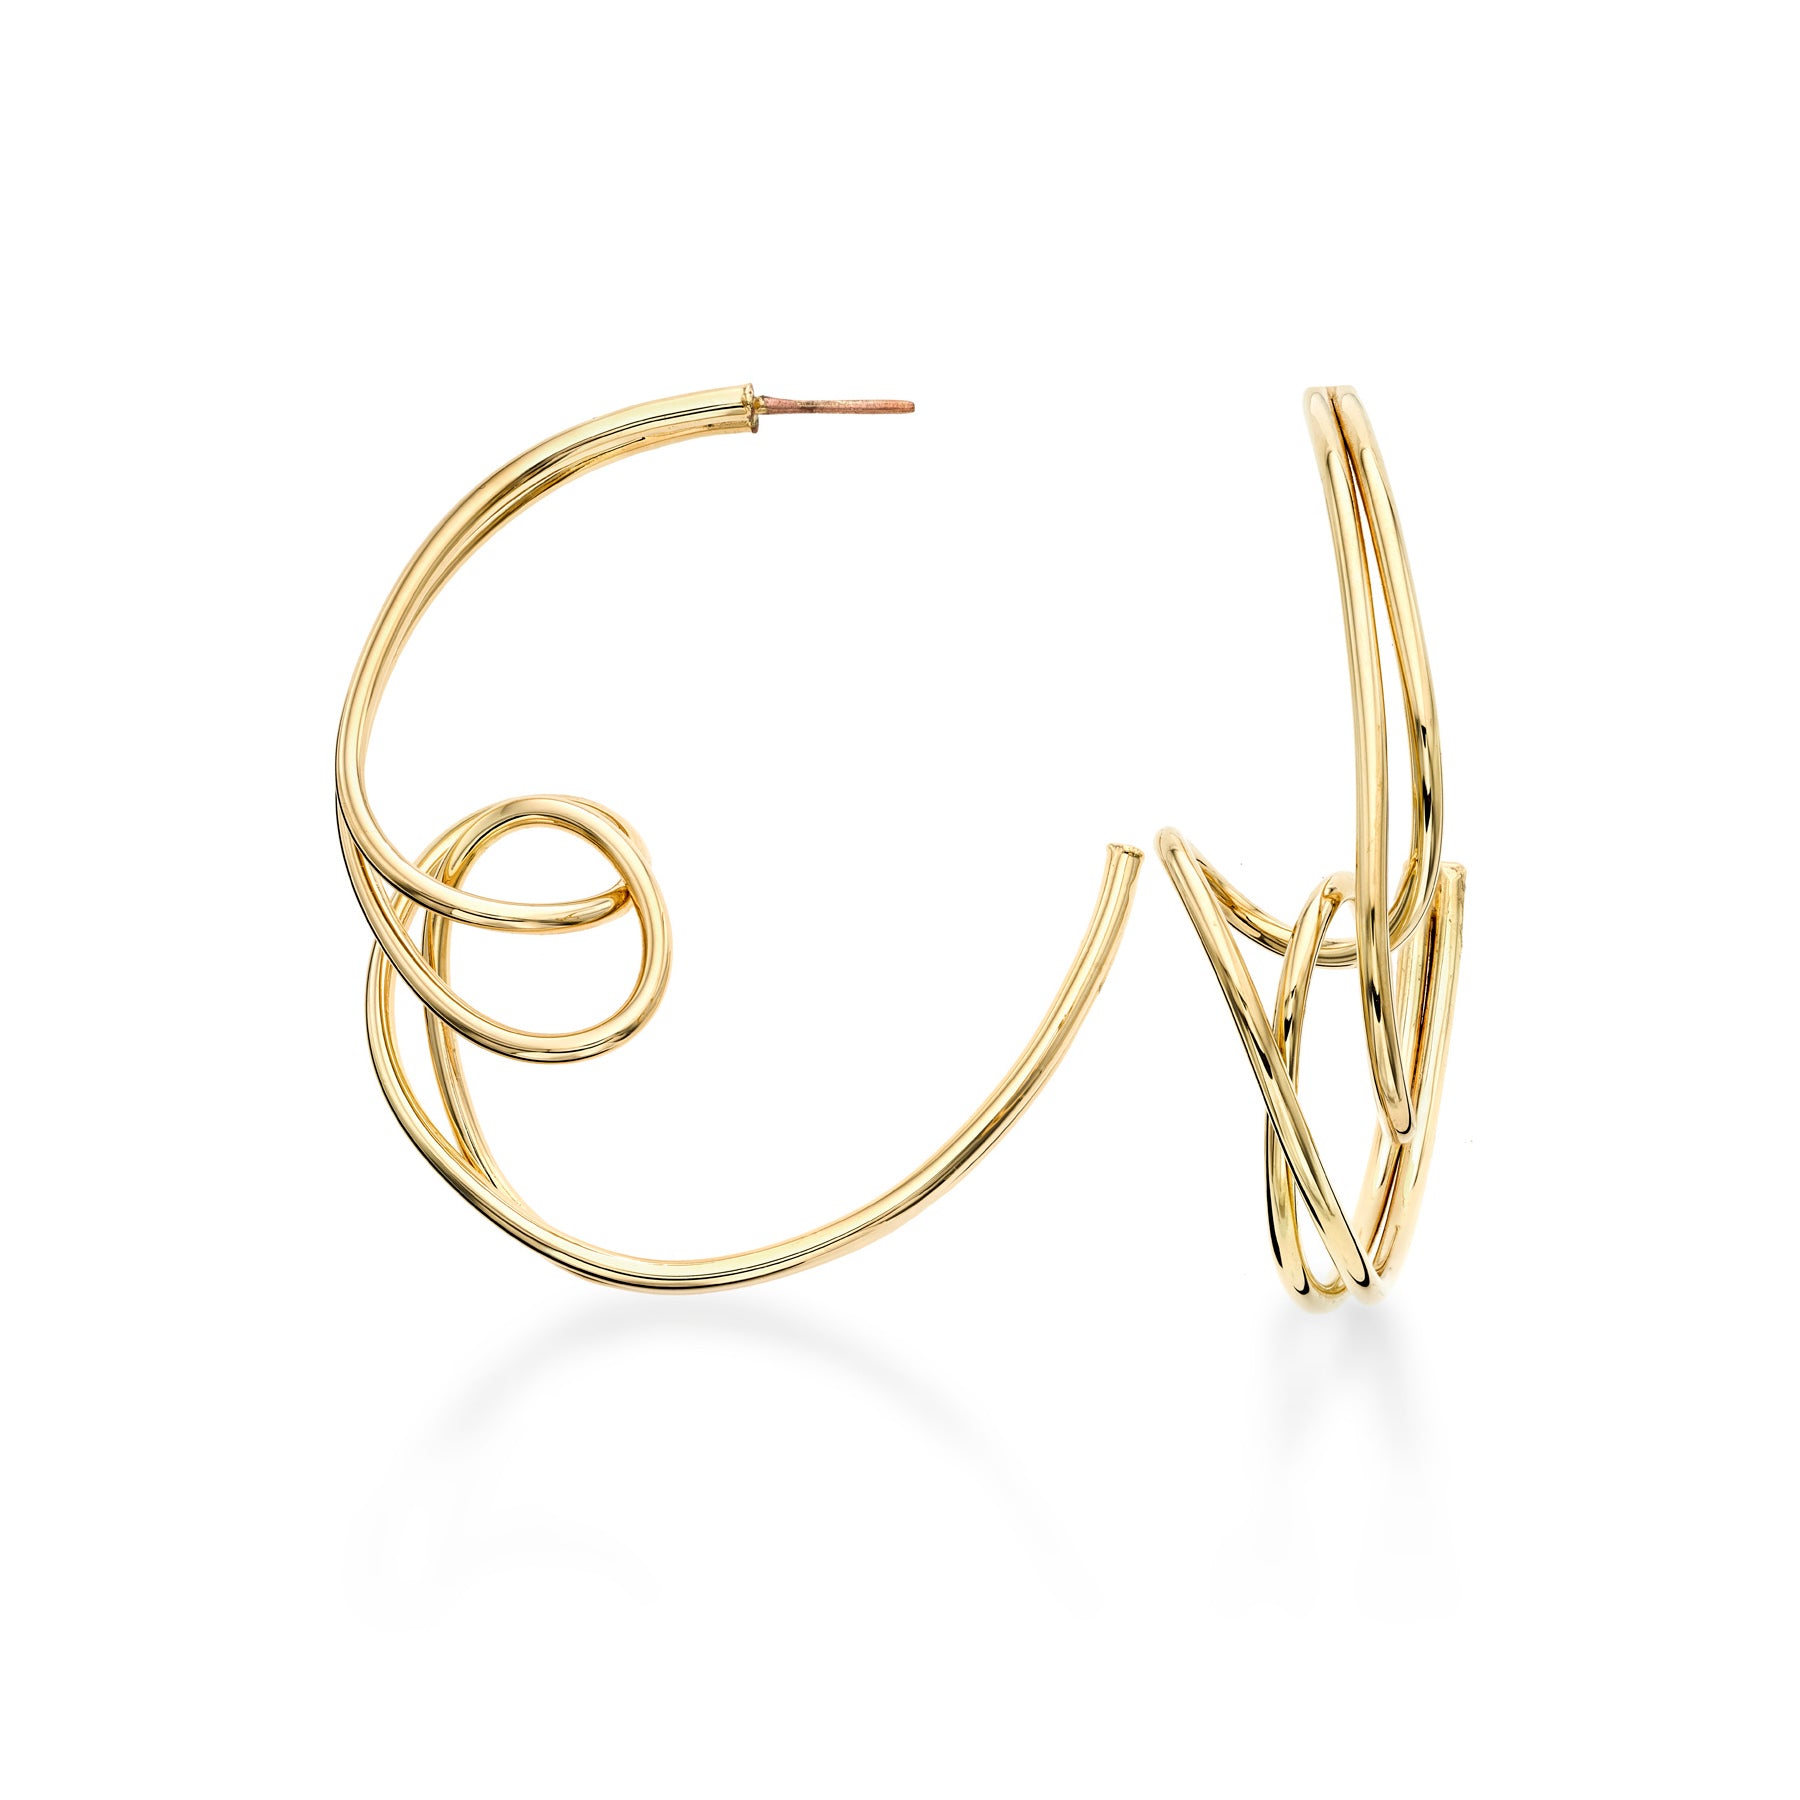 "Mademoiselles" is a another take on a traditional hoop design Light, sculptural and airy with post and clutch back.   ~ 2" in diameter  ~ hand fabricated brass wires create this light and airy earring. Finished with 14k nickel free gold plating. 